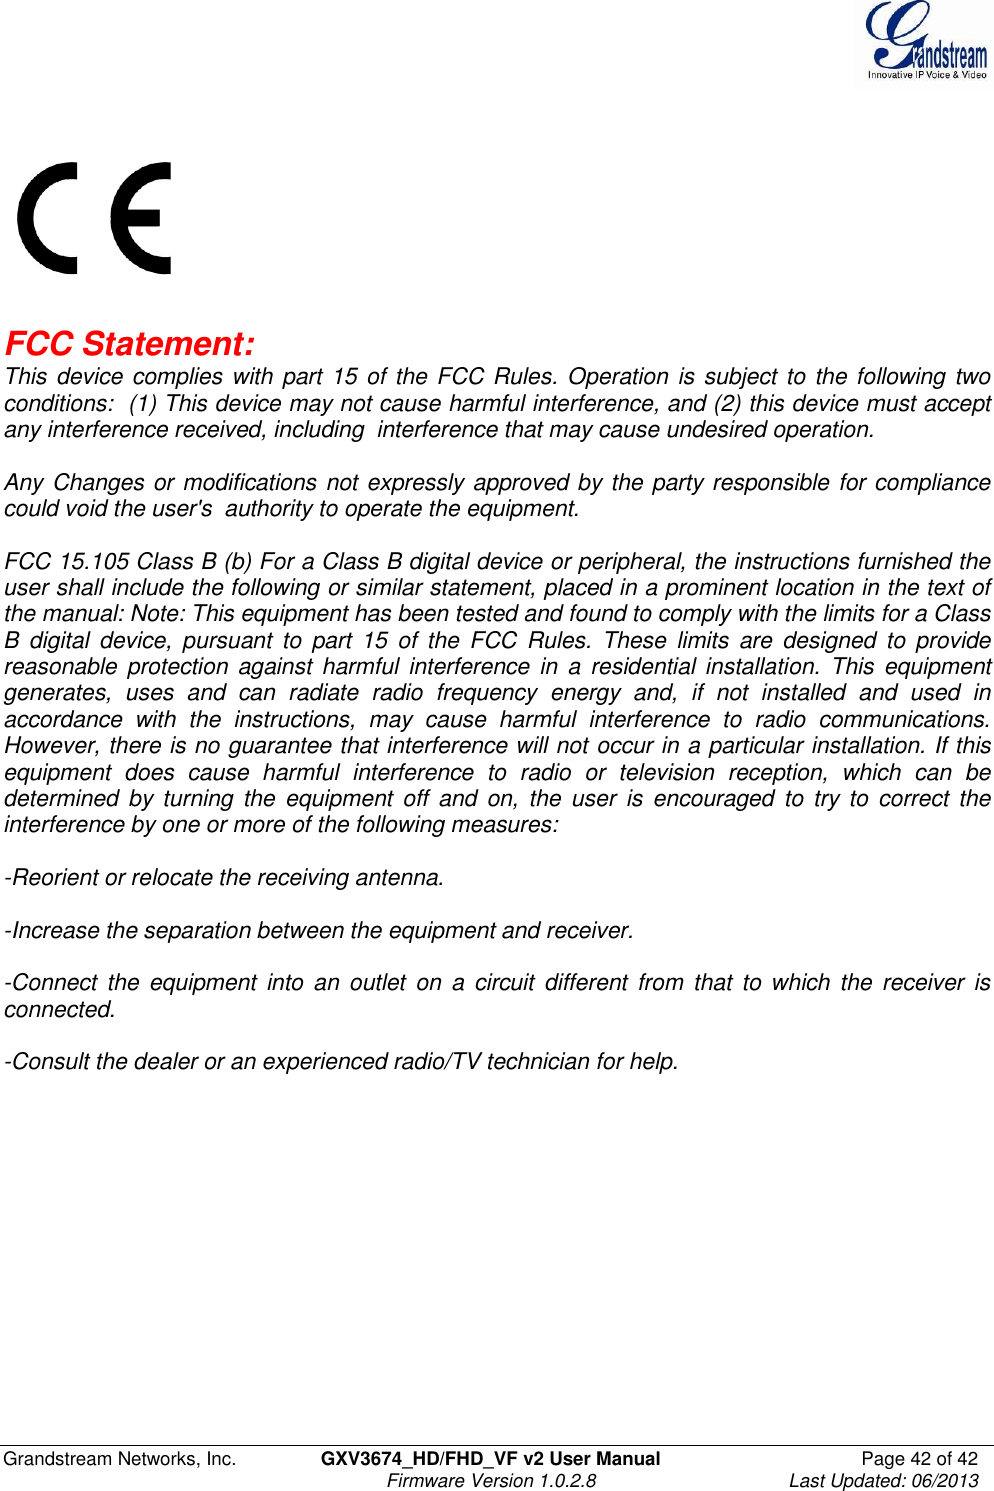  Grandstream Networks, Inc.  GXV3674_HD/FHD_VF v2 User Manual  Page 42 of 42   Firmware Version 1.0.2.8  Last Updated: 06/2013      FCC Statement:    This device complies with part 15 of the FCC Rules. Operation is subject to the following two conditions:  (1) This device may not cause harmful interference, and (2) this device must accept any interference received, including  interference that may cause undesired operation.    Any Changes or modifications not expressly approved by the party responsible for compliance could void the user&apos;s  authority to operate the equipment.     FCC 15.105 Class B (b) For a Class B digital device or peripheral, the instructions furnished the user shall include the following or similar statement, placed in a prominent location in the text of the manual: Note: This equipment has been tested and found to comply with the limits for a Class B  digital  device,  pursuant  to  part  15  of  the  FCC  Rules.  These  limits  are  designed  to  provide reasonable protection against  harmful  interference  in  a  residential  installation.  This  equipment generates,  uses  and  can  radiate  radio  frequency  energy  and,  if  not  installed  and  used  in accordance  with  the  instructions,  may  cause  harmful  interference  to  radio  communications. However, there is no guarantee that interference will not occur in a particular installation. If this equipment  does  cause  harmful  interference  to  radio  or  television  reception,  which  can  be determined  by  turning  the  equipment  off  and  on,  the  user  is  encouraged  to  try  to  correct the interference by one or more of the following measures:   -Reorient or relocate the receiving antenna.   -Increase the separation between the equipment and receiver.   -Connect  the  equipment  into  an  outlet  on  a  circuit  different  from  that  to  which  the  receiver  is connected.  -Consult the dealer or an experienced radio/TV technician for help. 